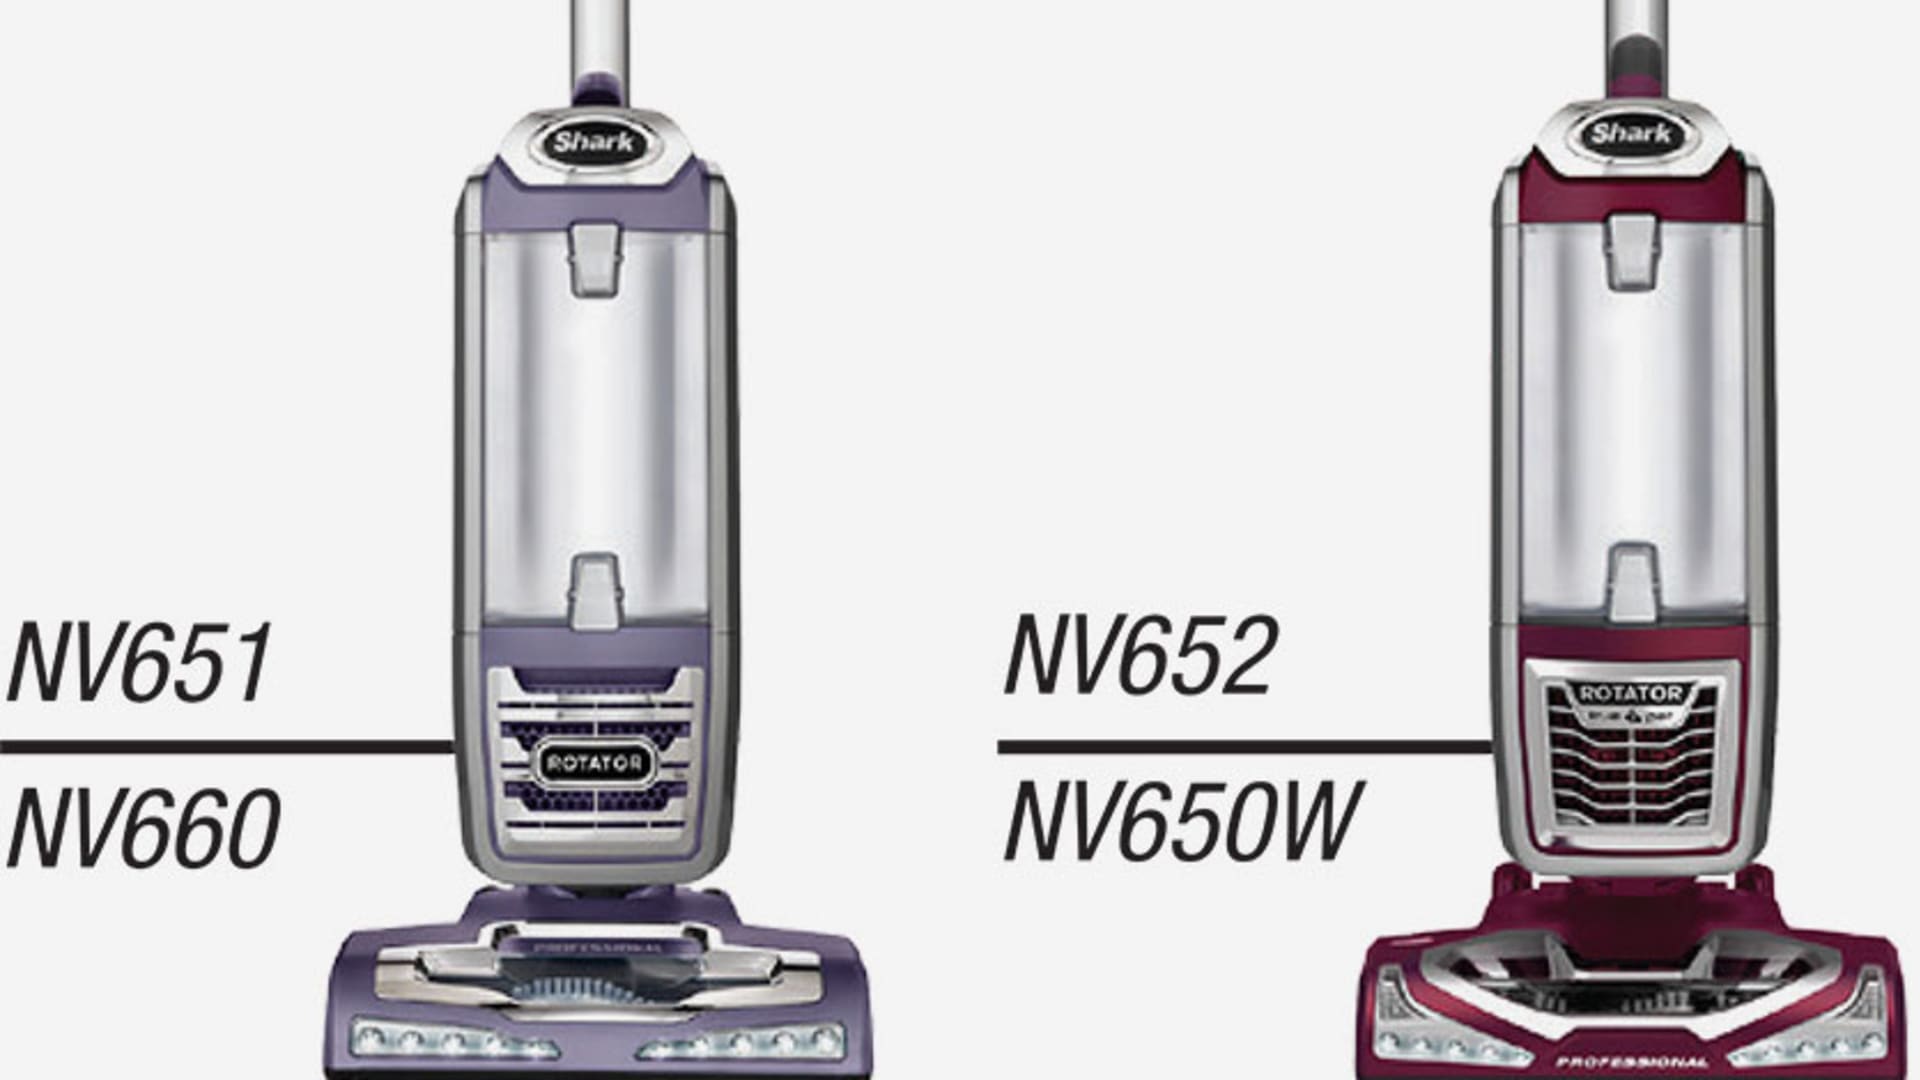 Shark vacuum recall due to potential electric shock